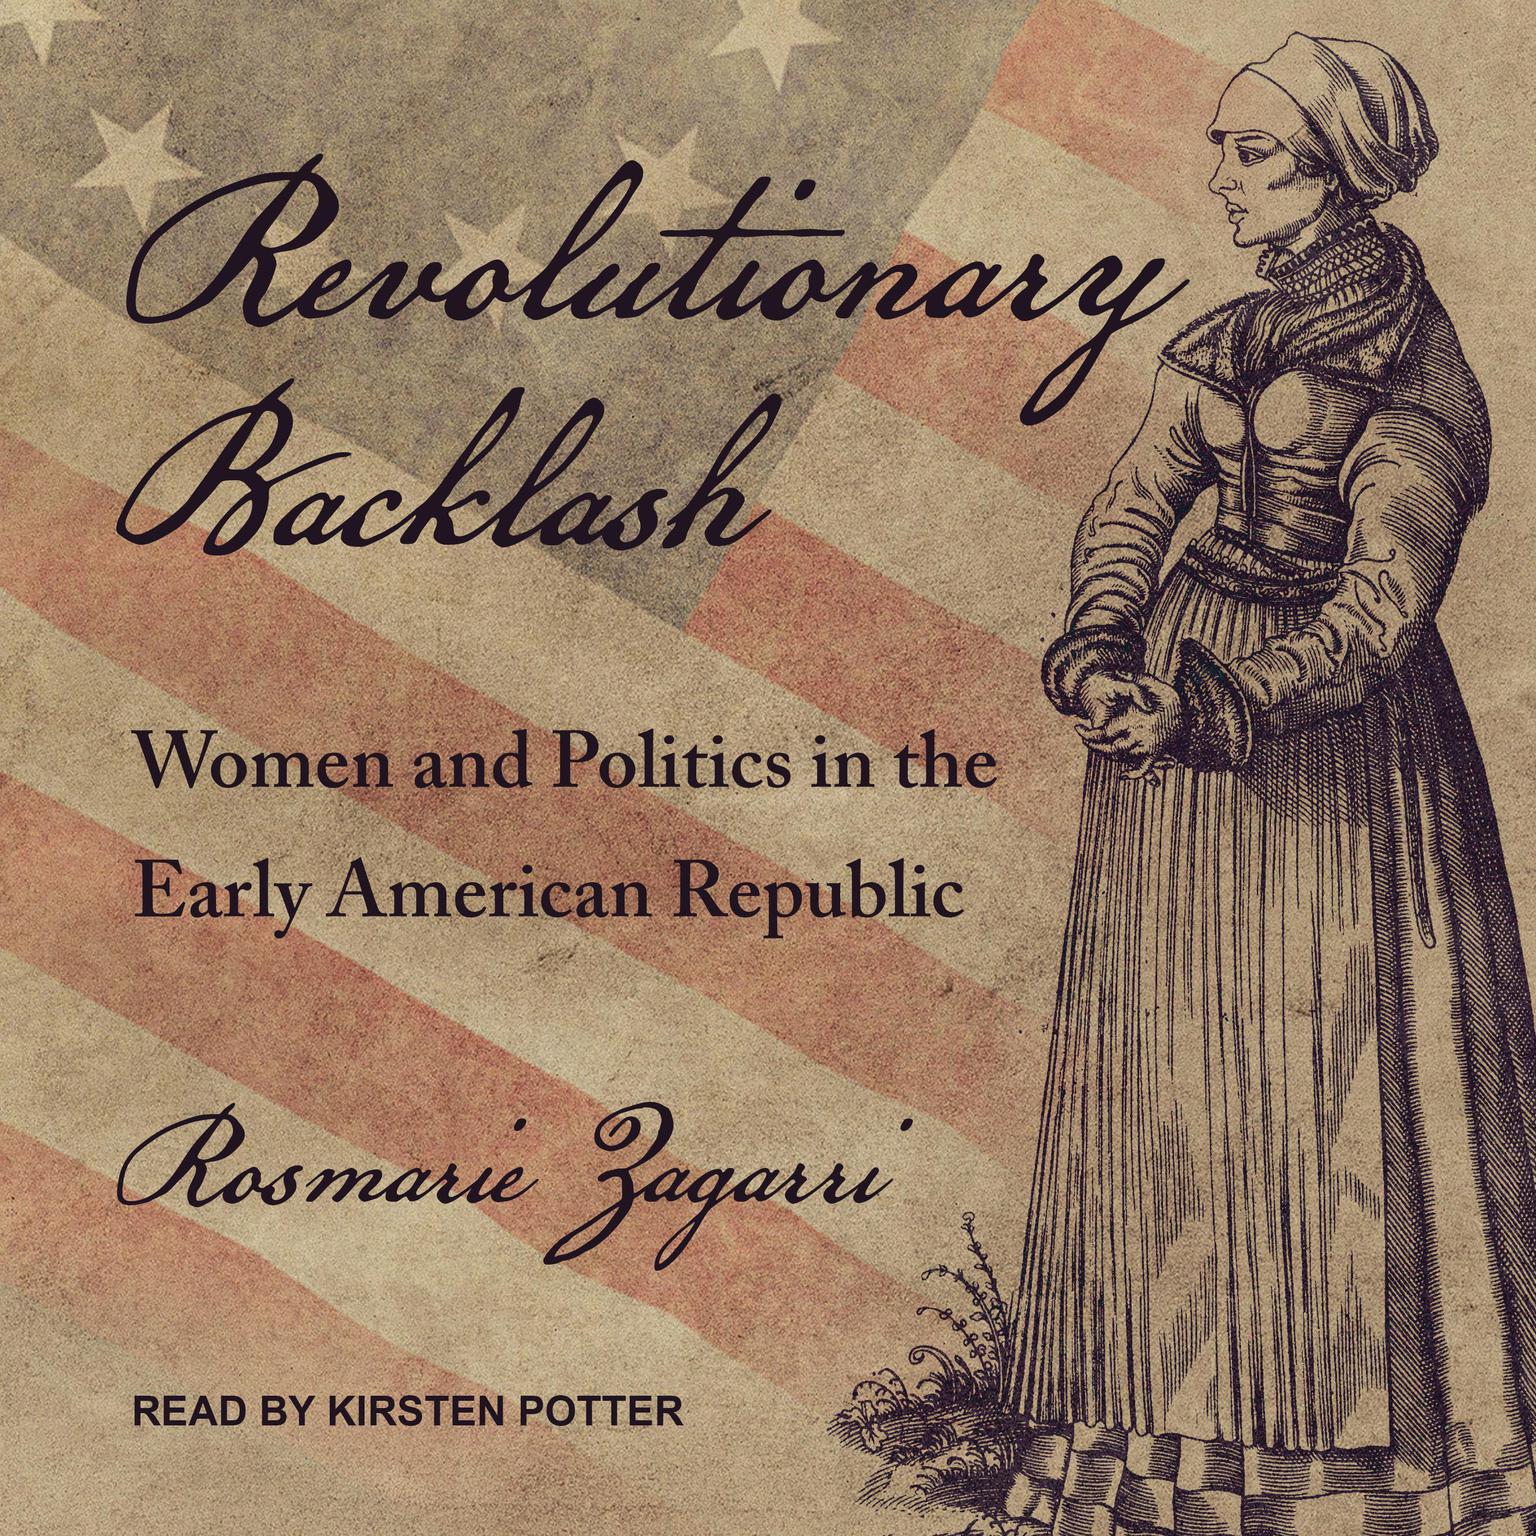 Revolutionary Backlash: Women and Politics in the Early American Republic Audiobook, by Rosmarie Zagarri